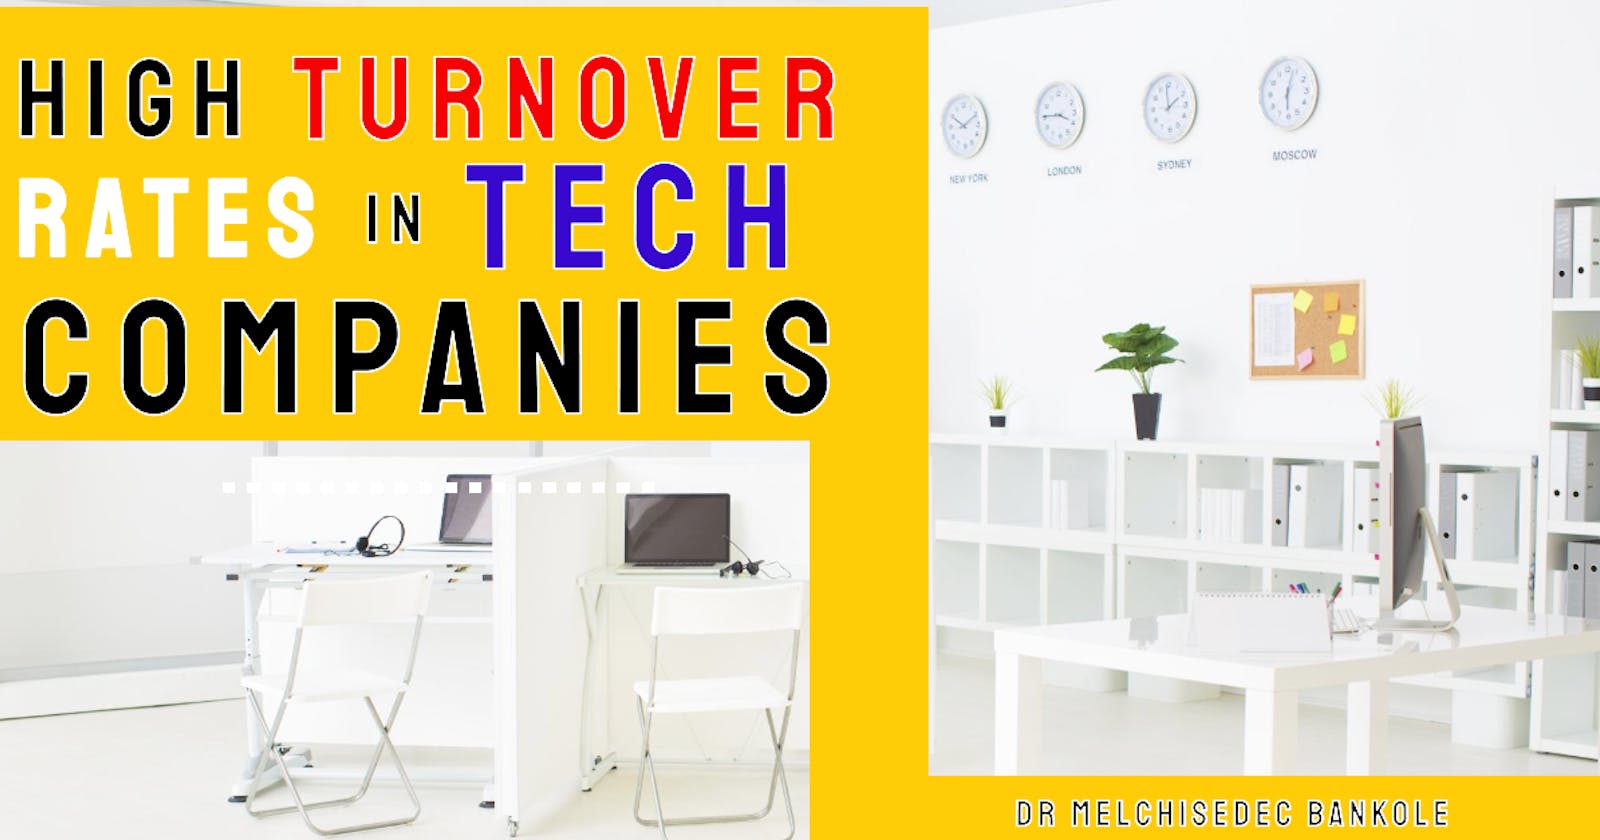 What Are The Reasons Behind The High Turnover Rate At Large Tech Companies?